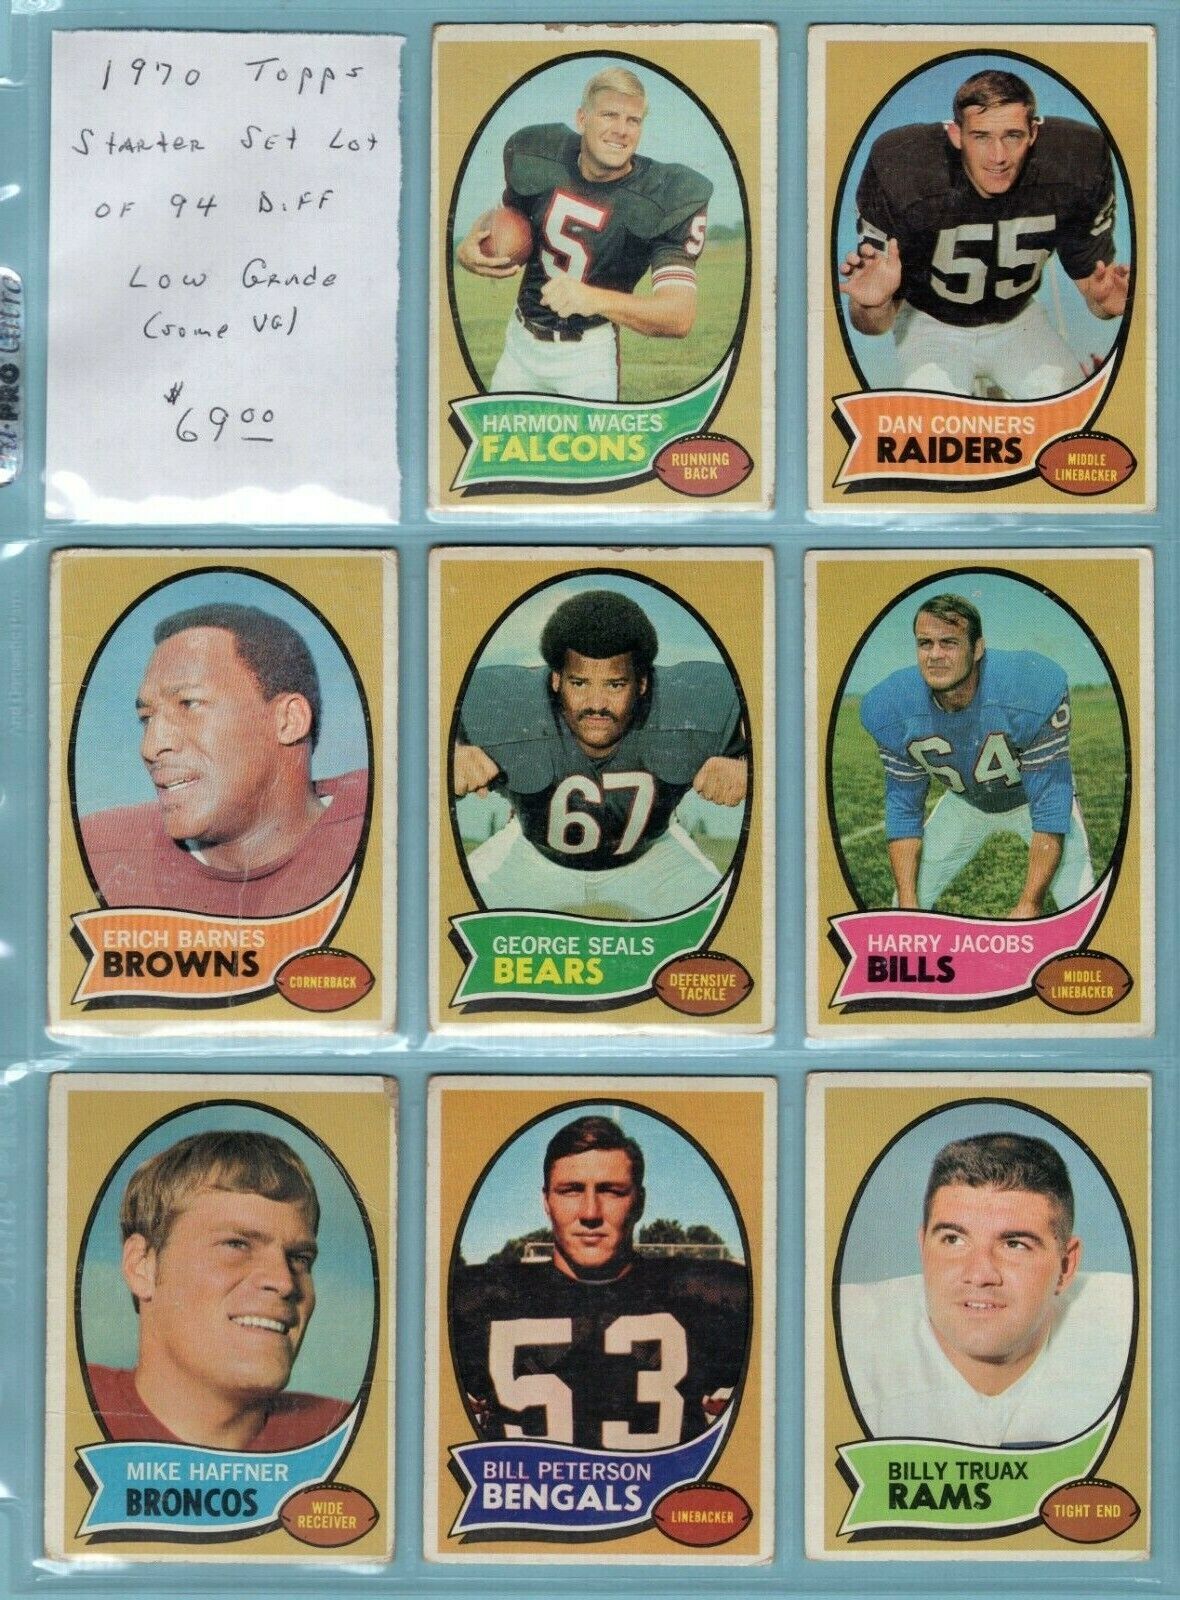 1970 Topps Starter Set Lot of 94 Different Football Cards Low Grade